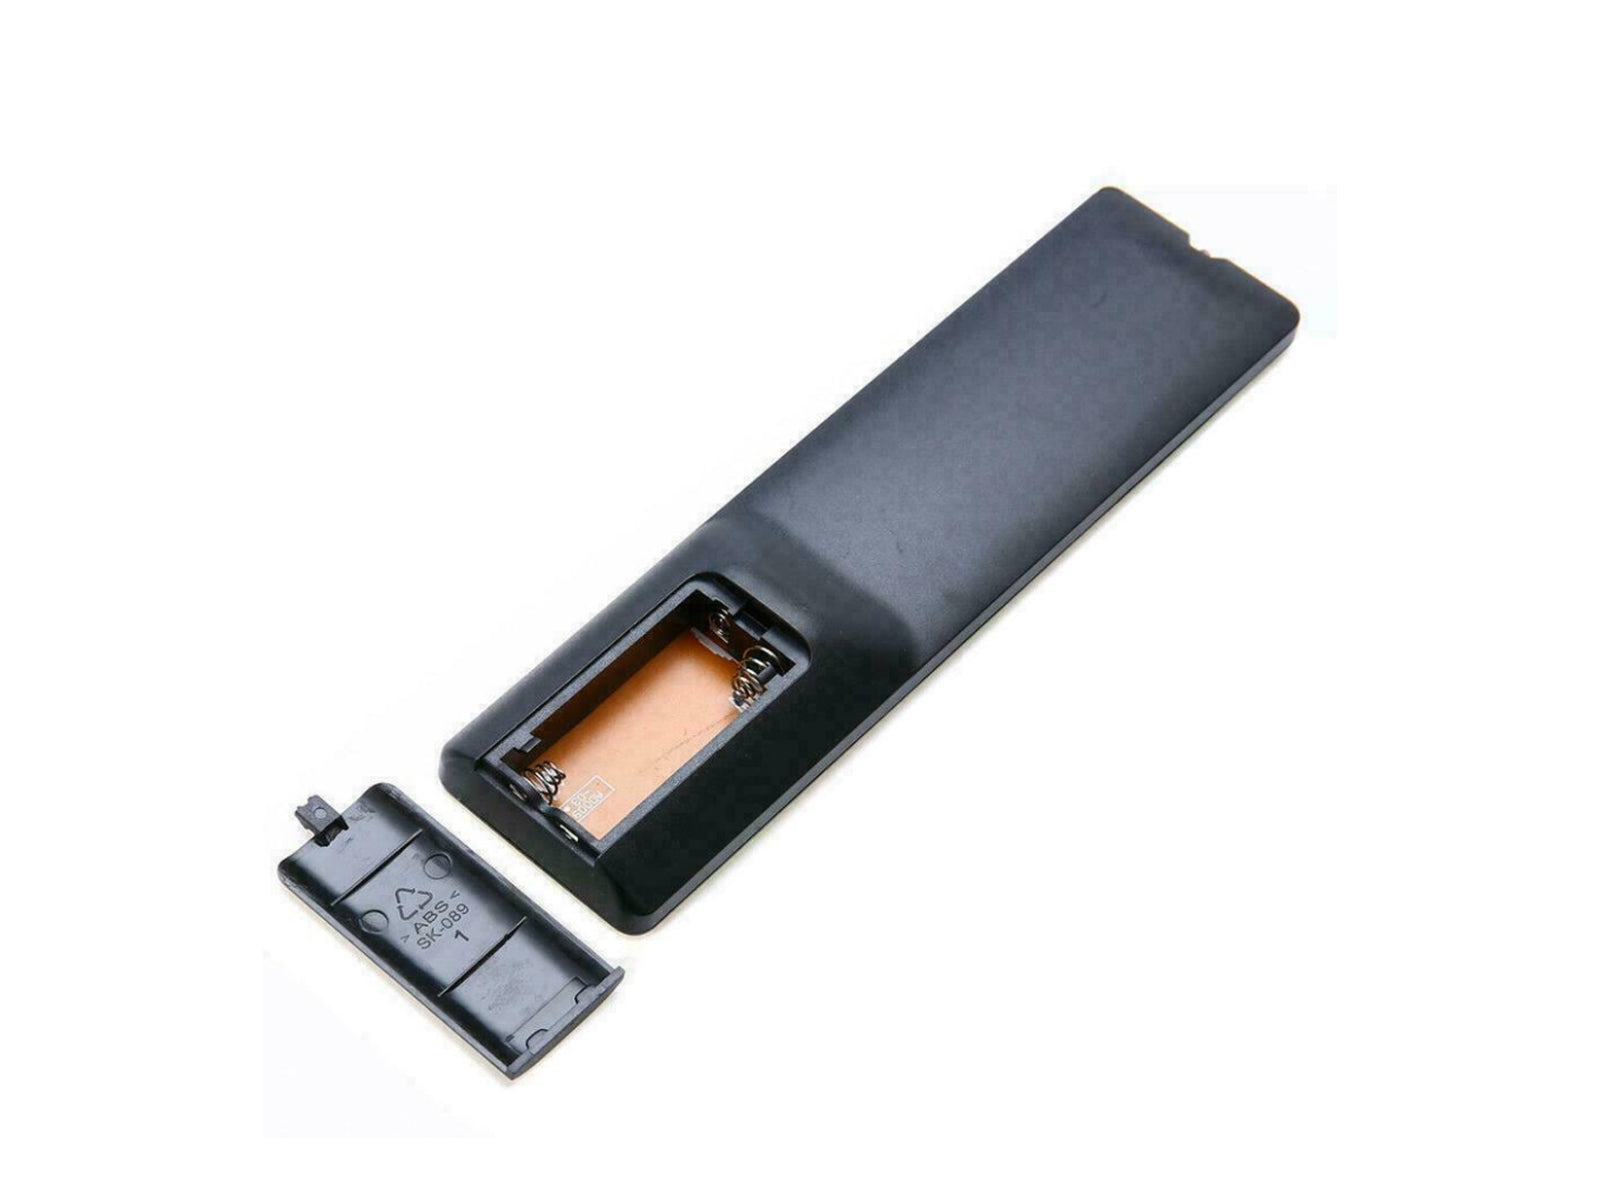 Replacement Remote Control for IPTV Box With Variety of MAG Box's Synergy Tech Int Battery Compartment